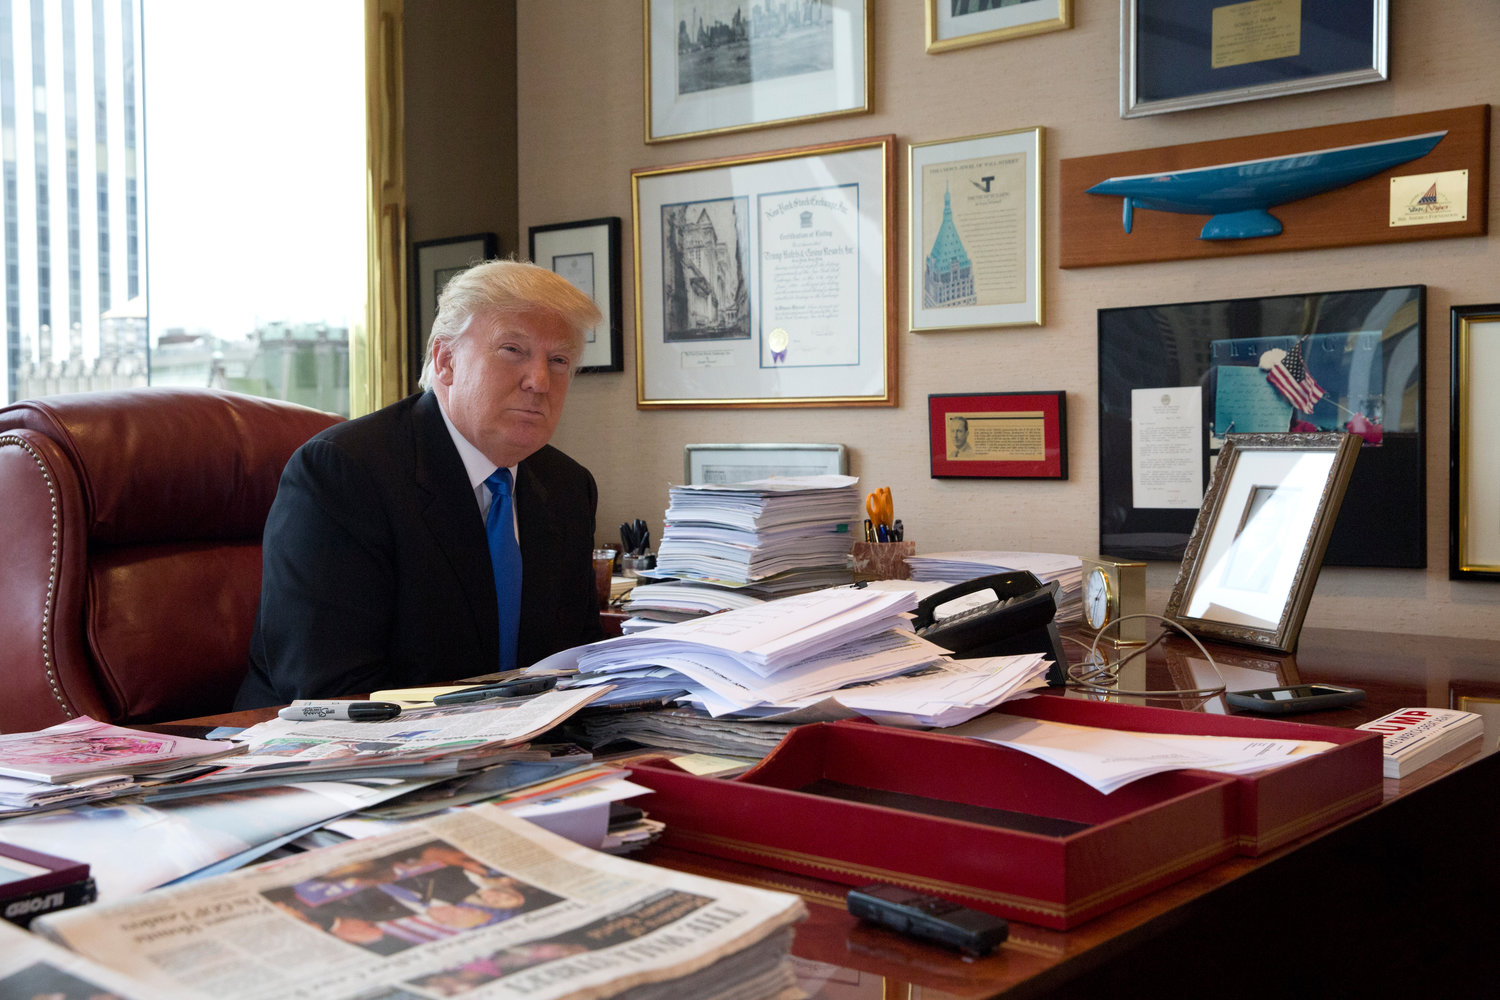 Then-Republican presidential candidate Donald Trump is photographed during an interview with The Associated Press in his office at Trump Tower in New York, May 10, 2016. The legal investigation into former President Donald Trump's handling of sensitive information is the culmination of a lifelong habit of collecting memorabilia, disregard of rules governing recordkeeping and a chaotic transition of his own making after refuse to accept defeat in 2020.